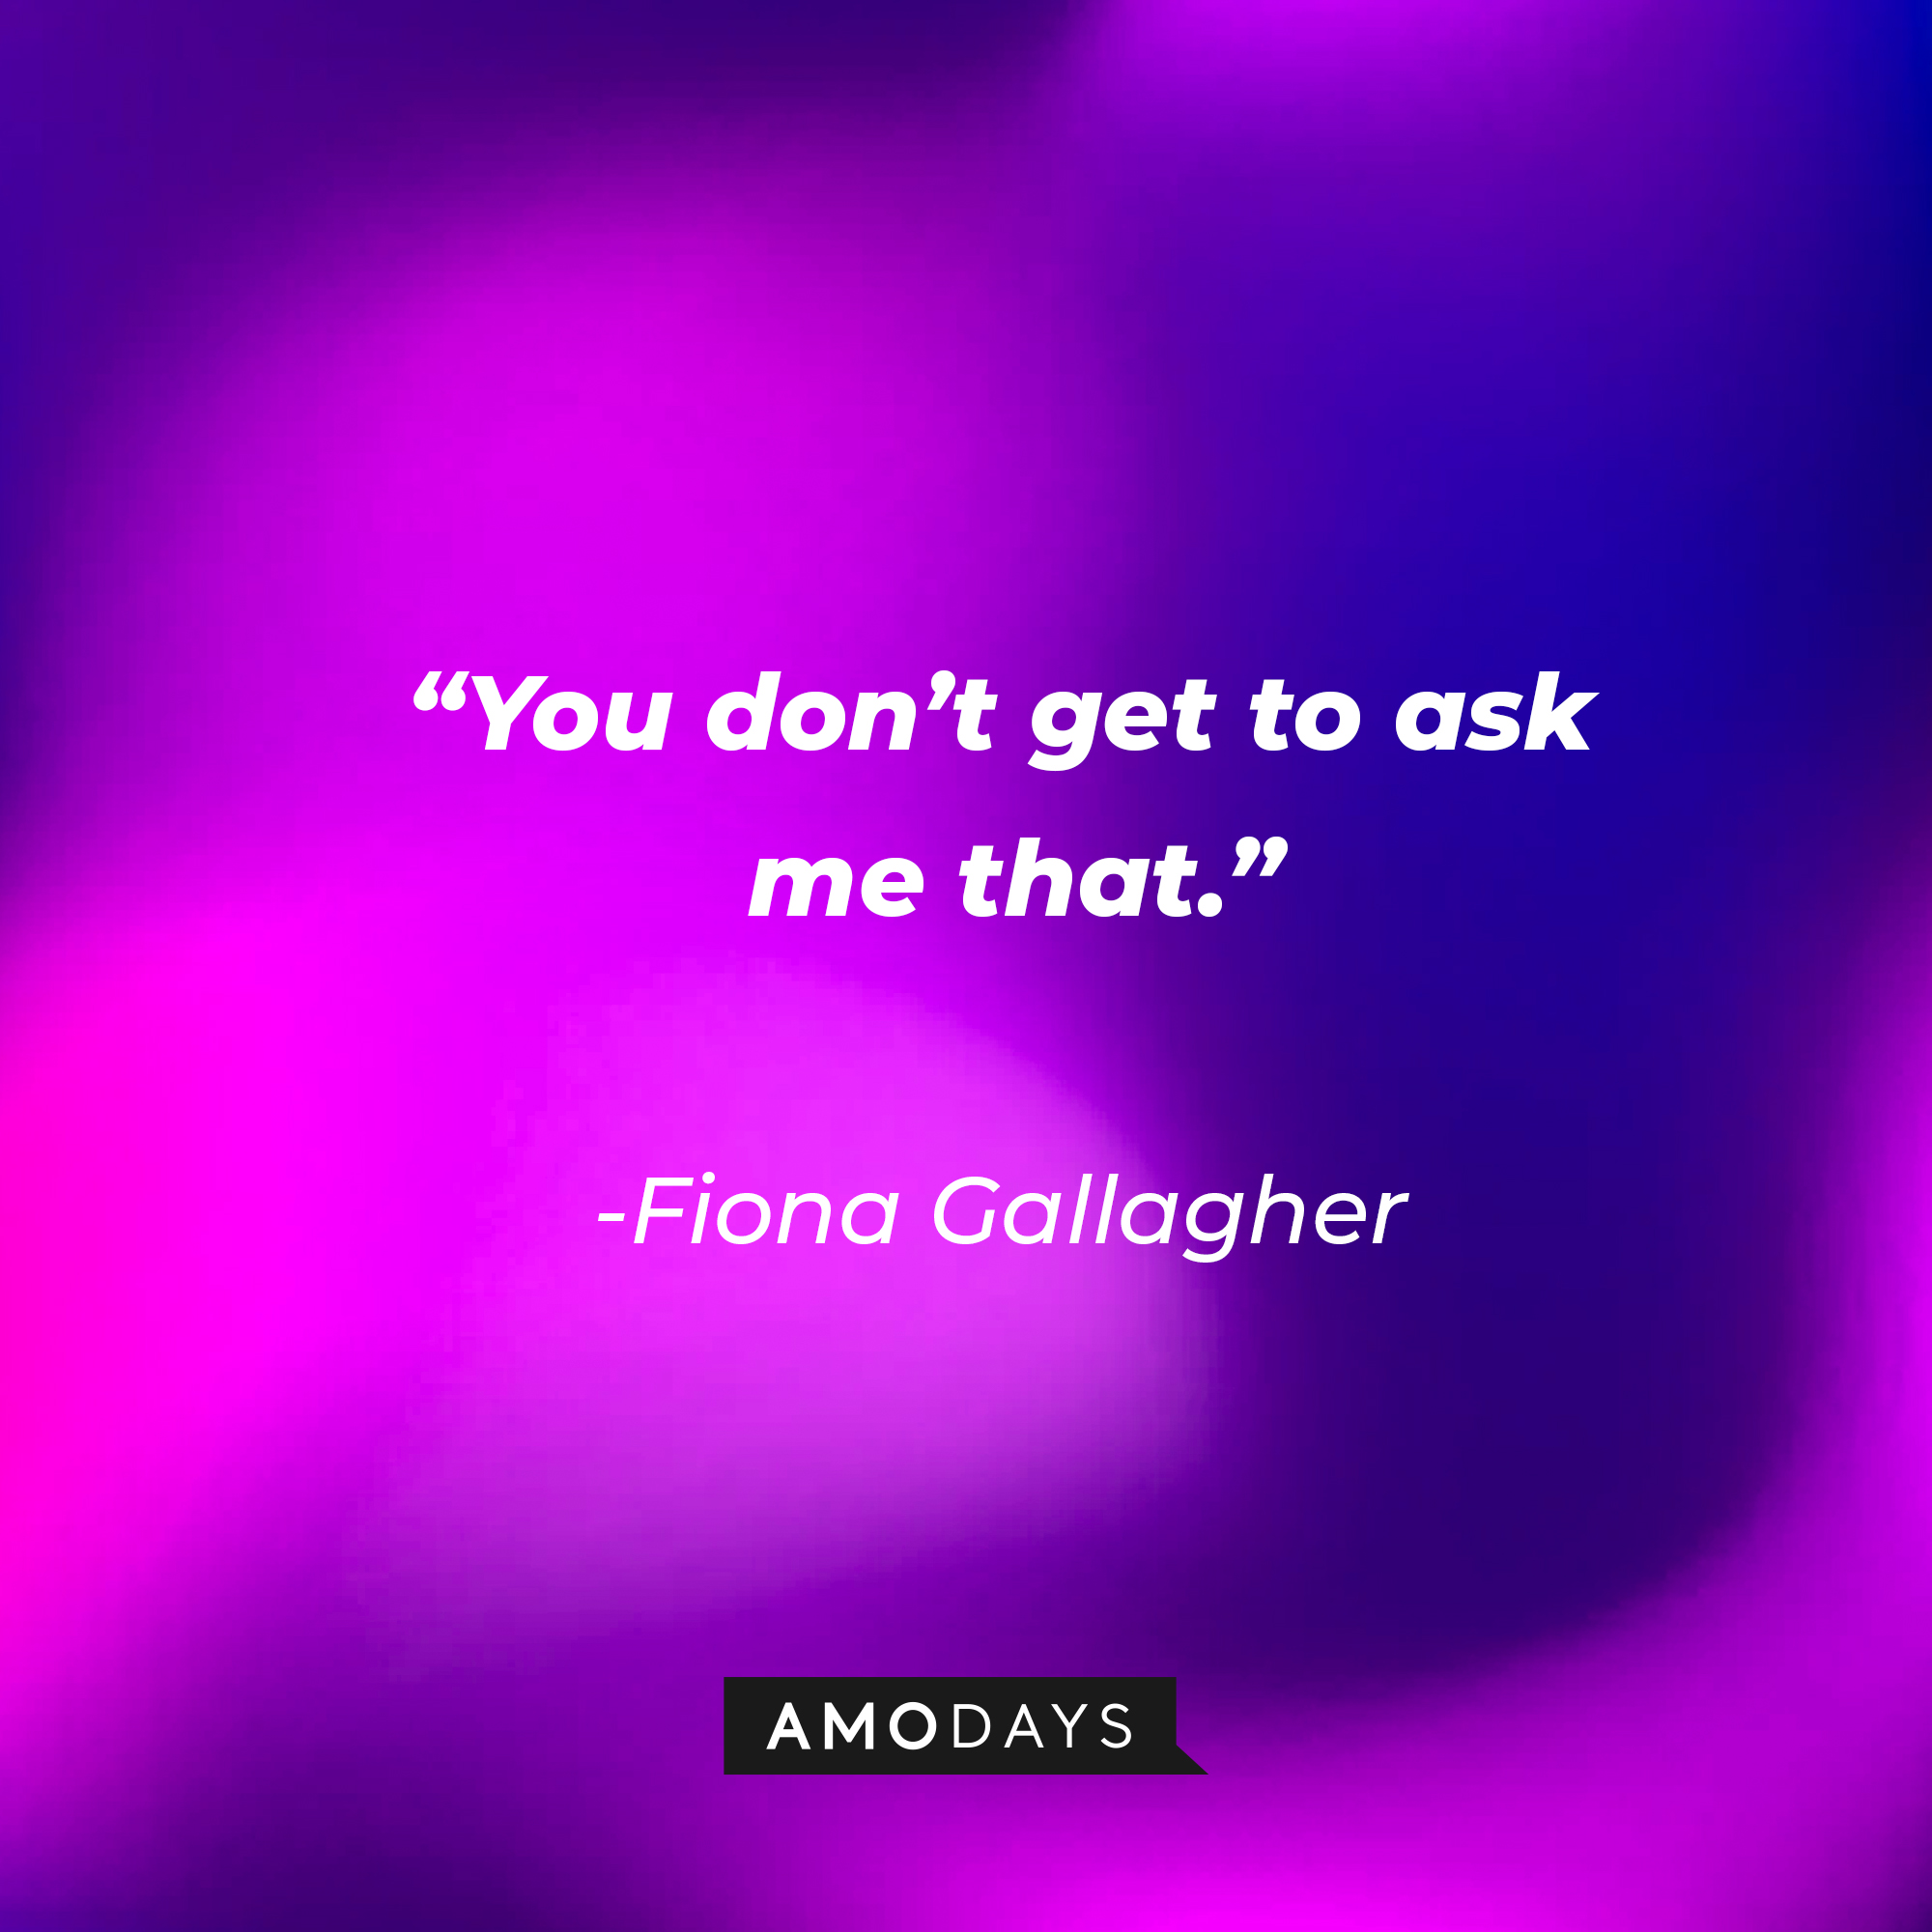 Fiona Gallagher’s quote: “You don’t get to ask me that.” | Source: AmoDays